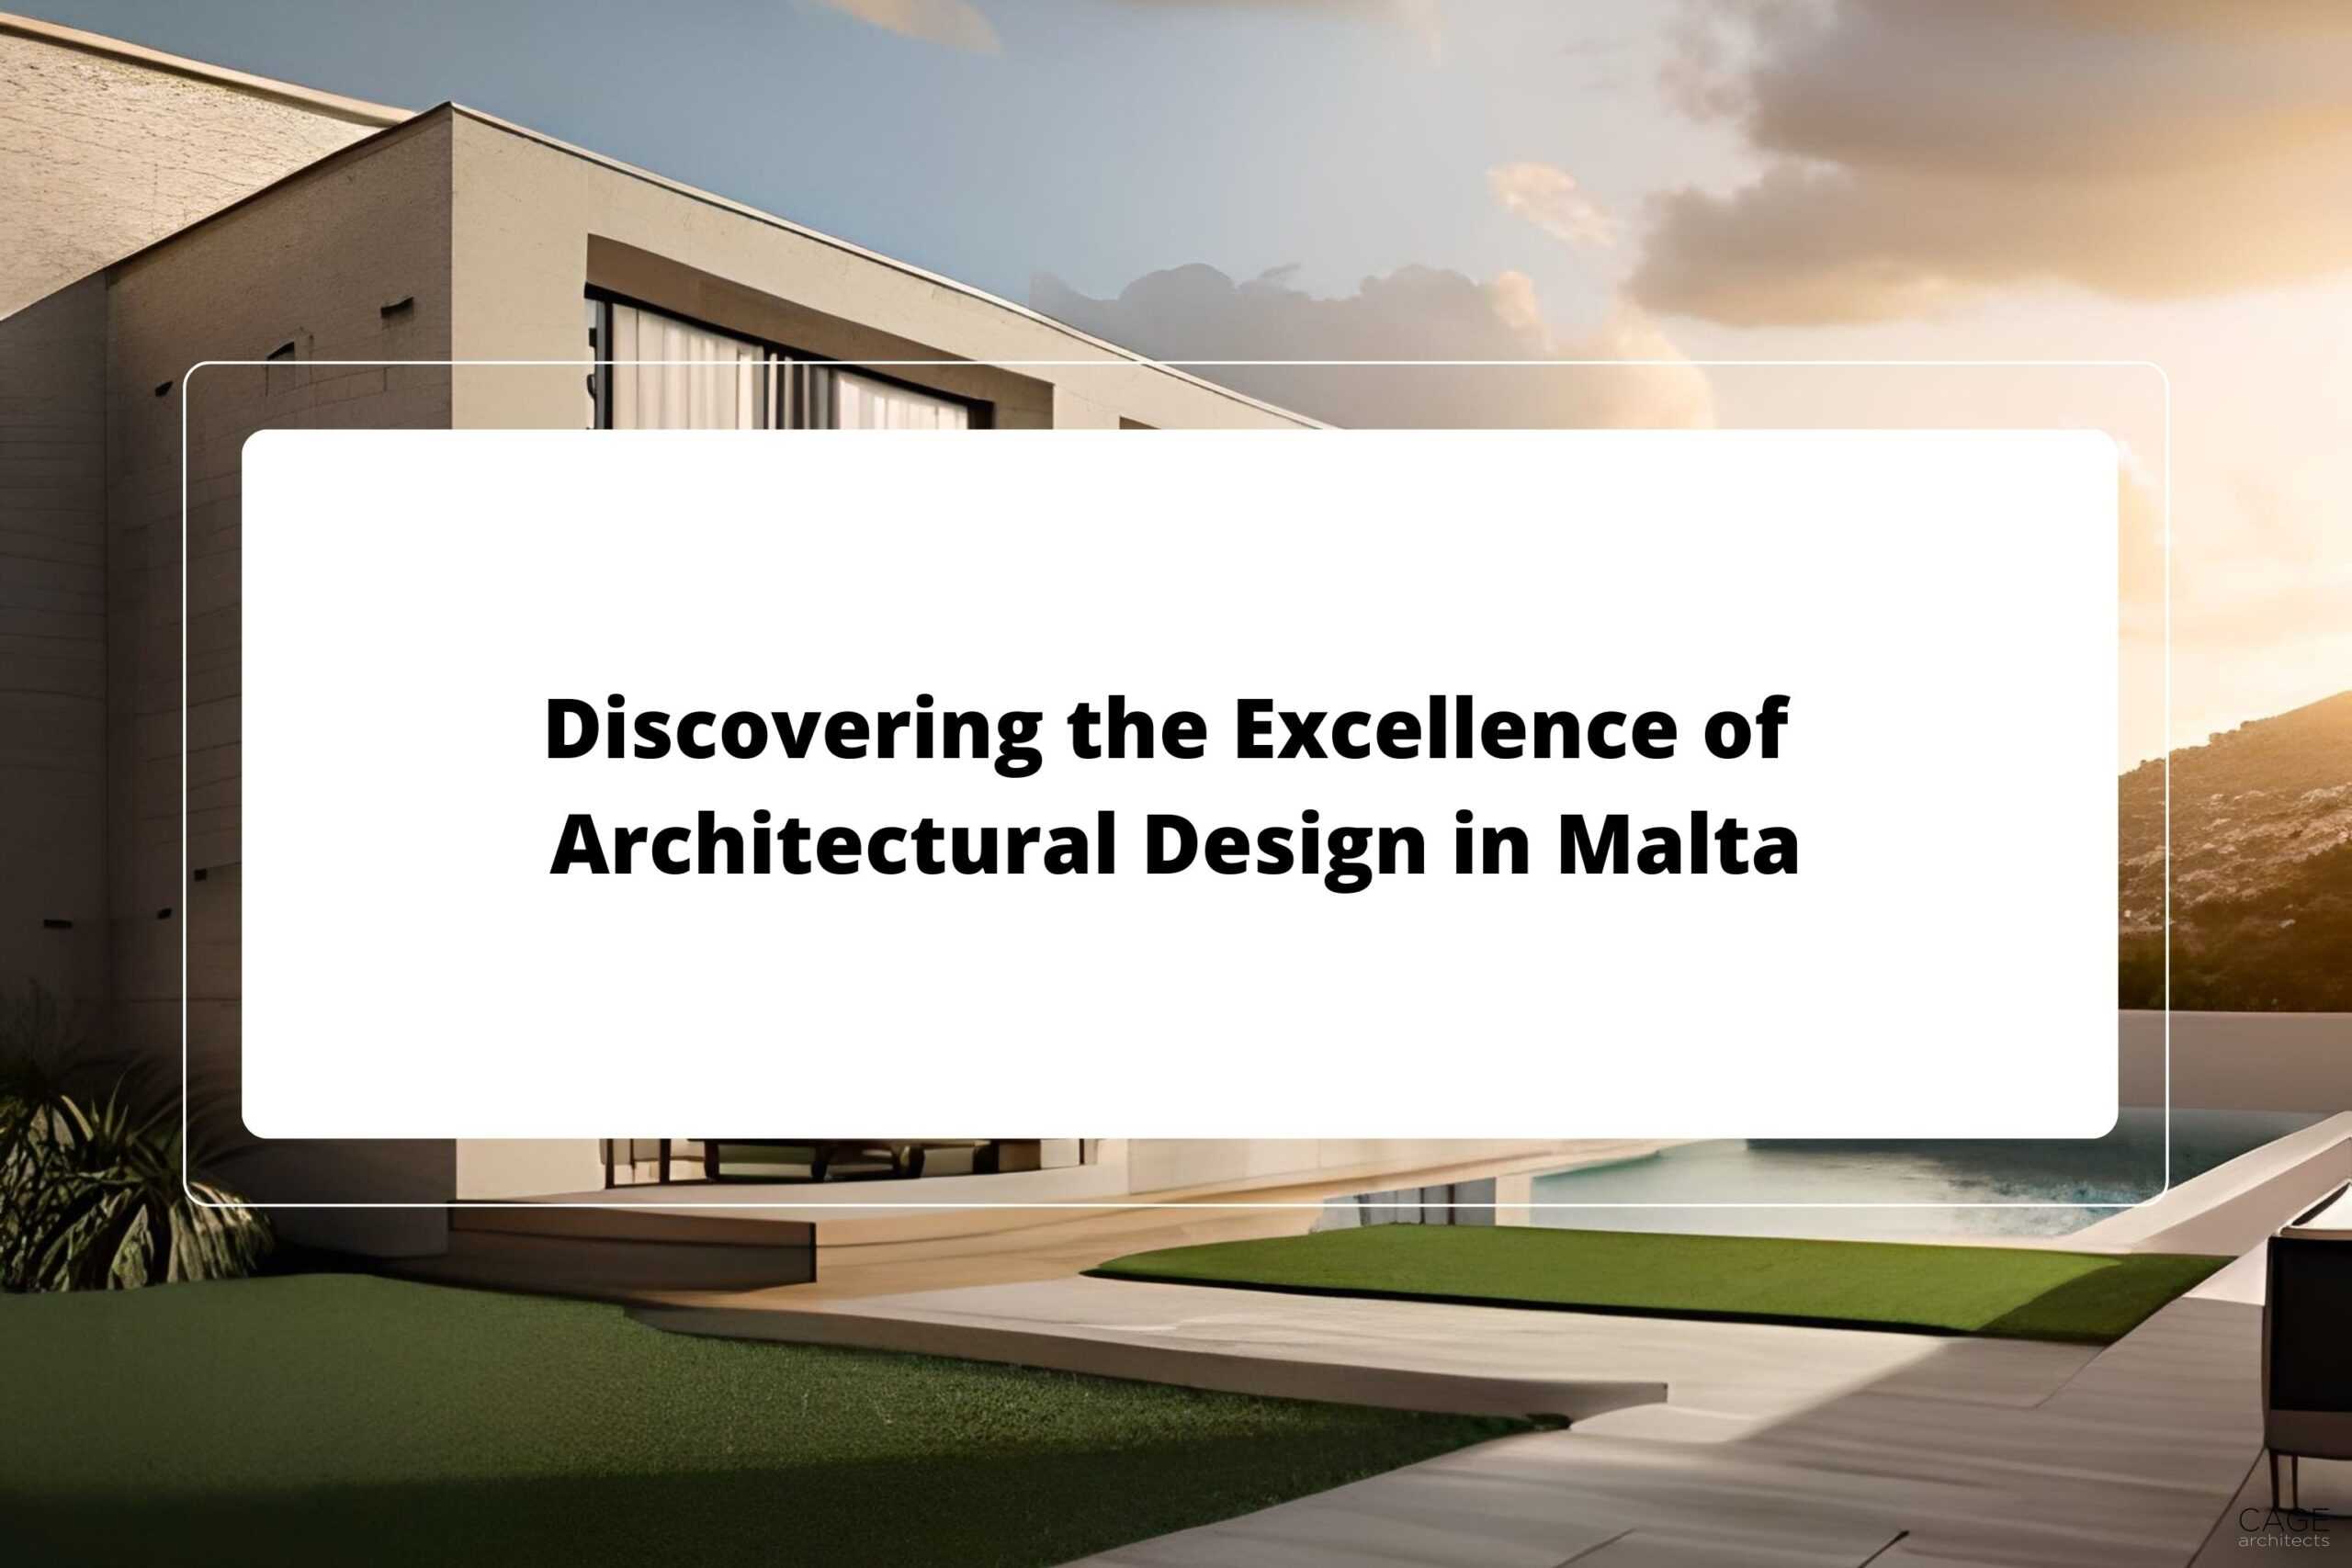 Discovering the Excellence of Architectural Design in Malta